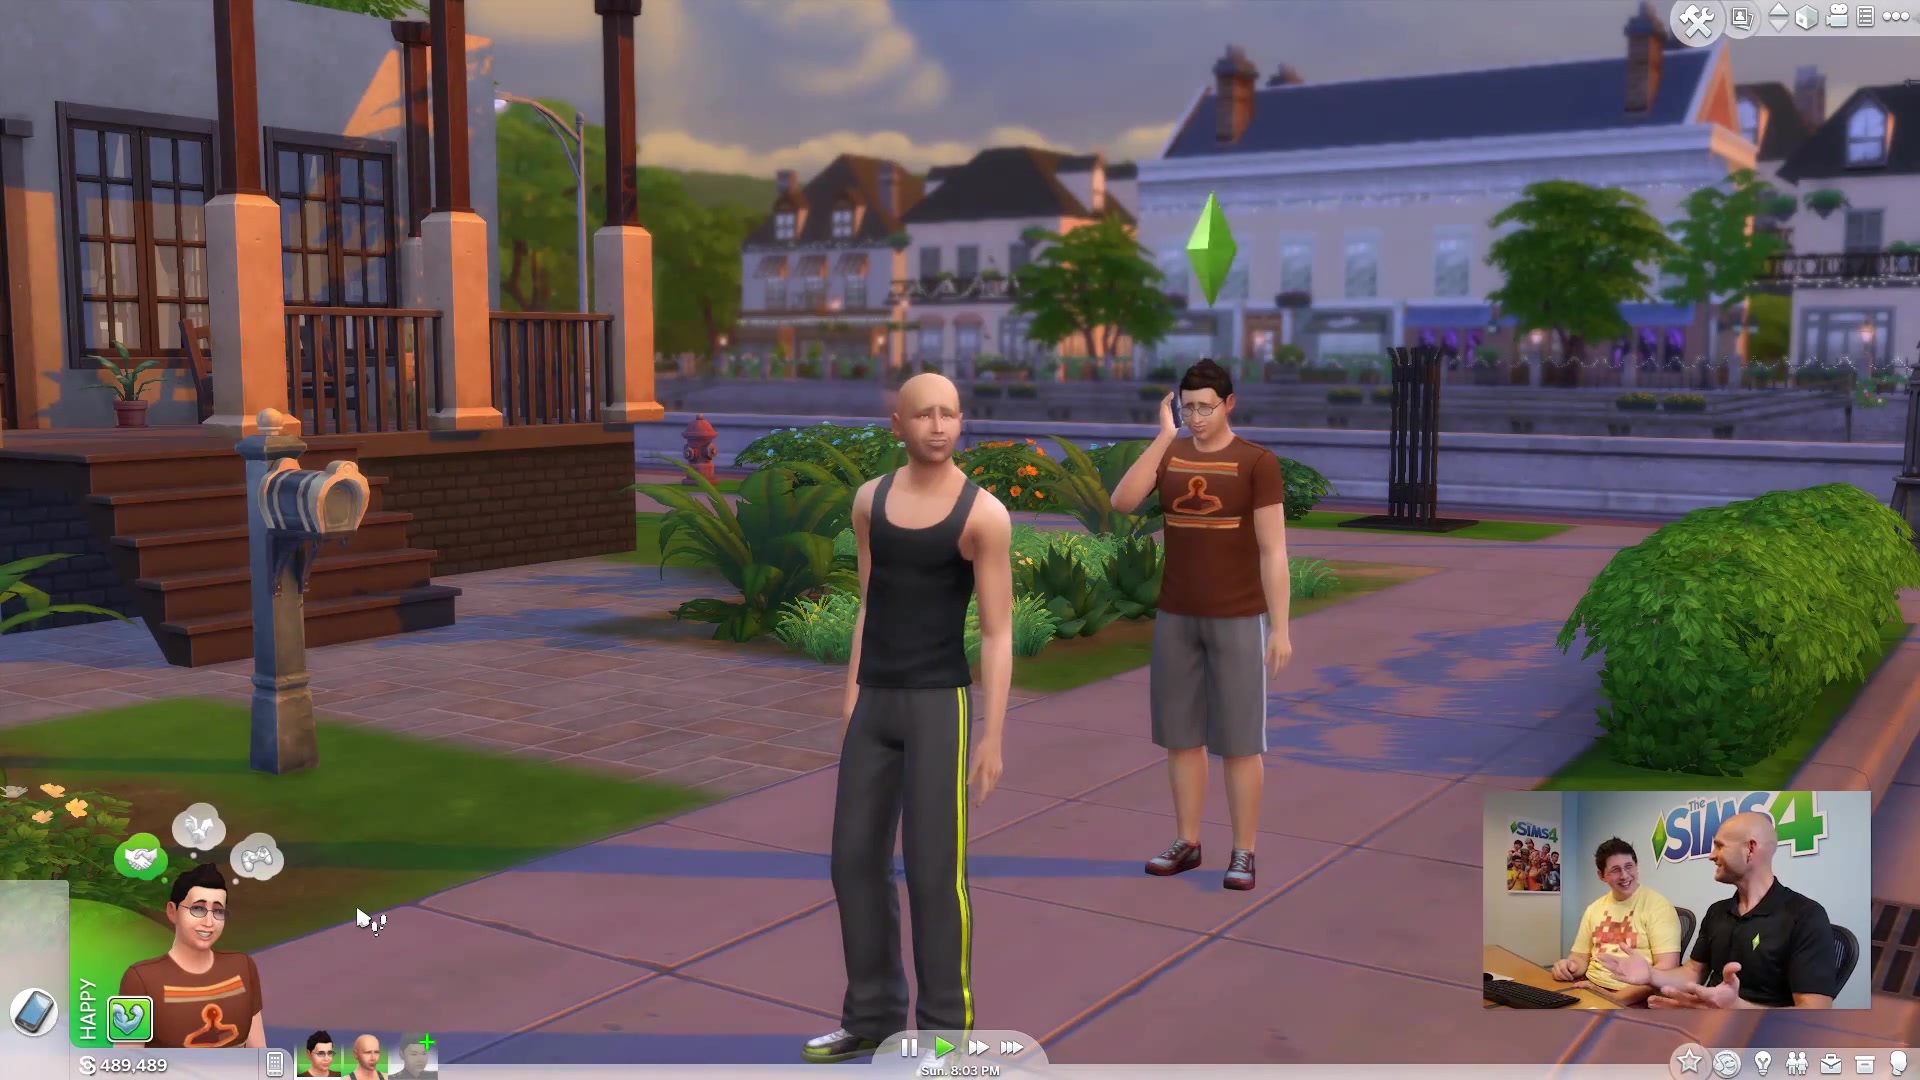 download sims 4 for free pc